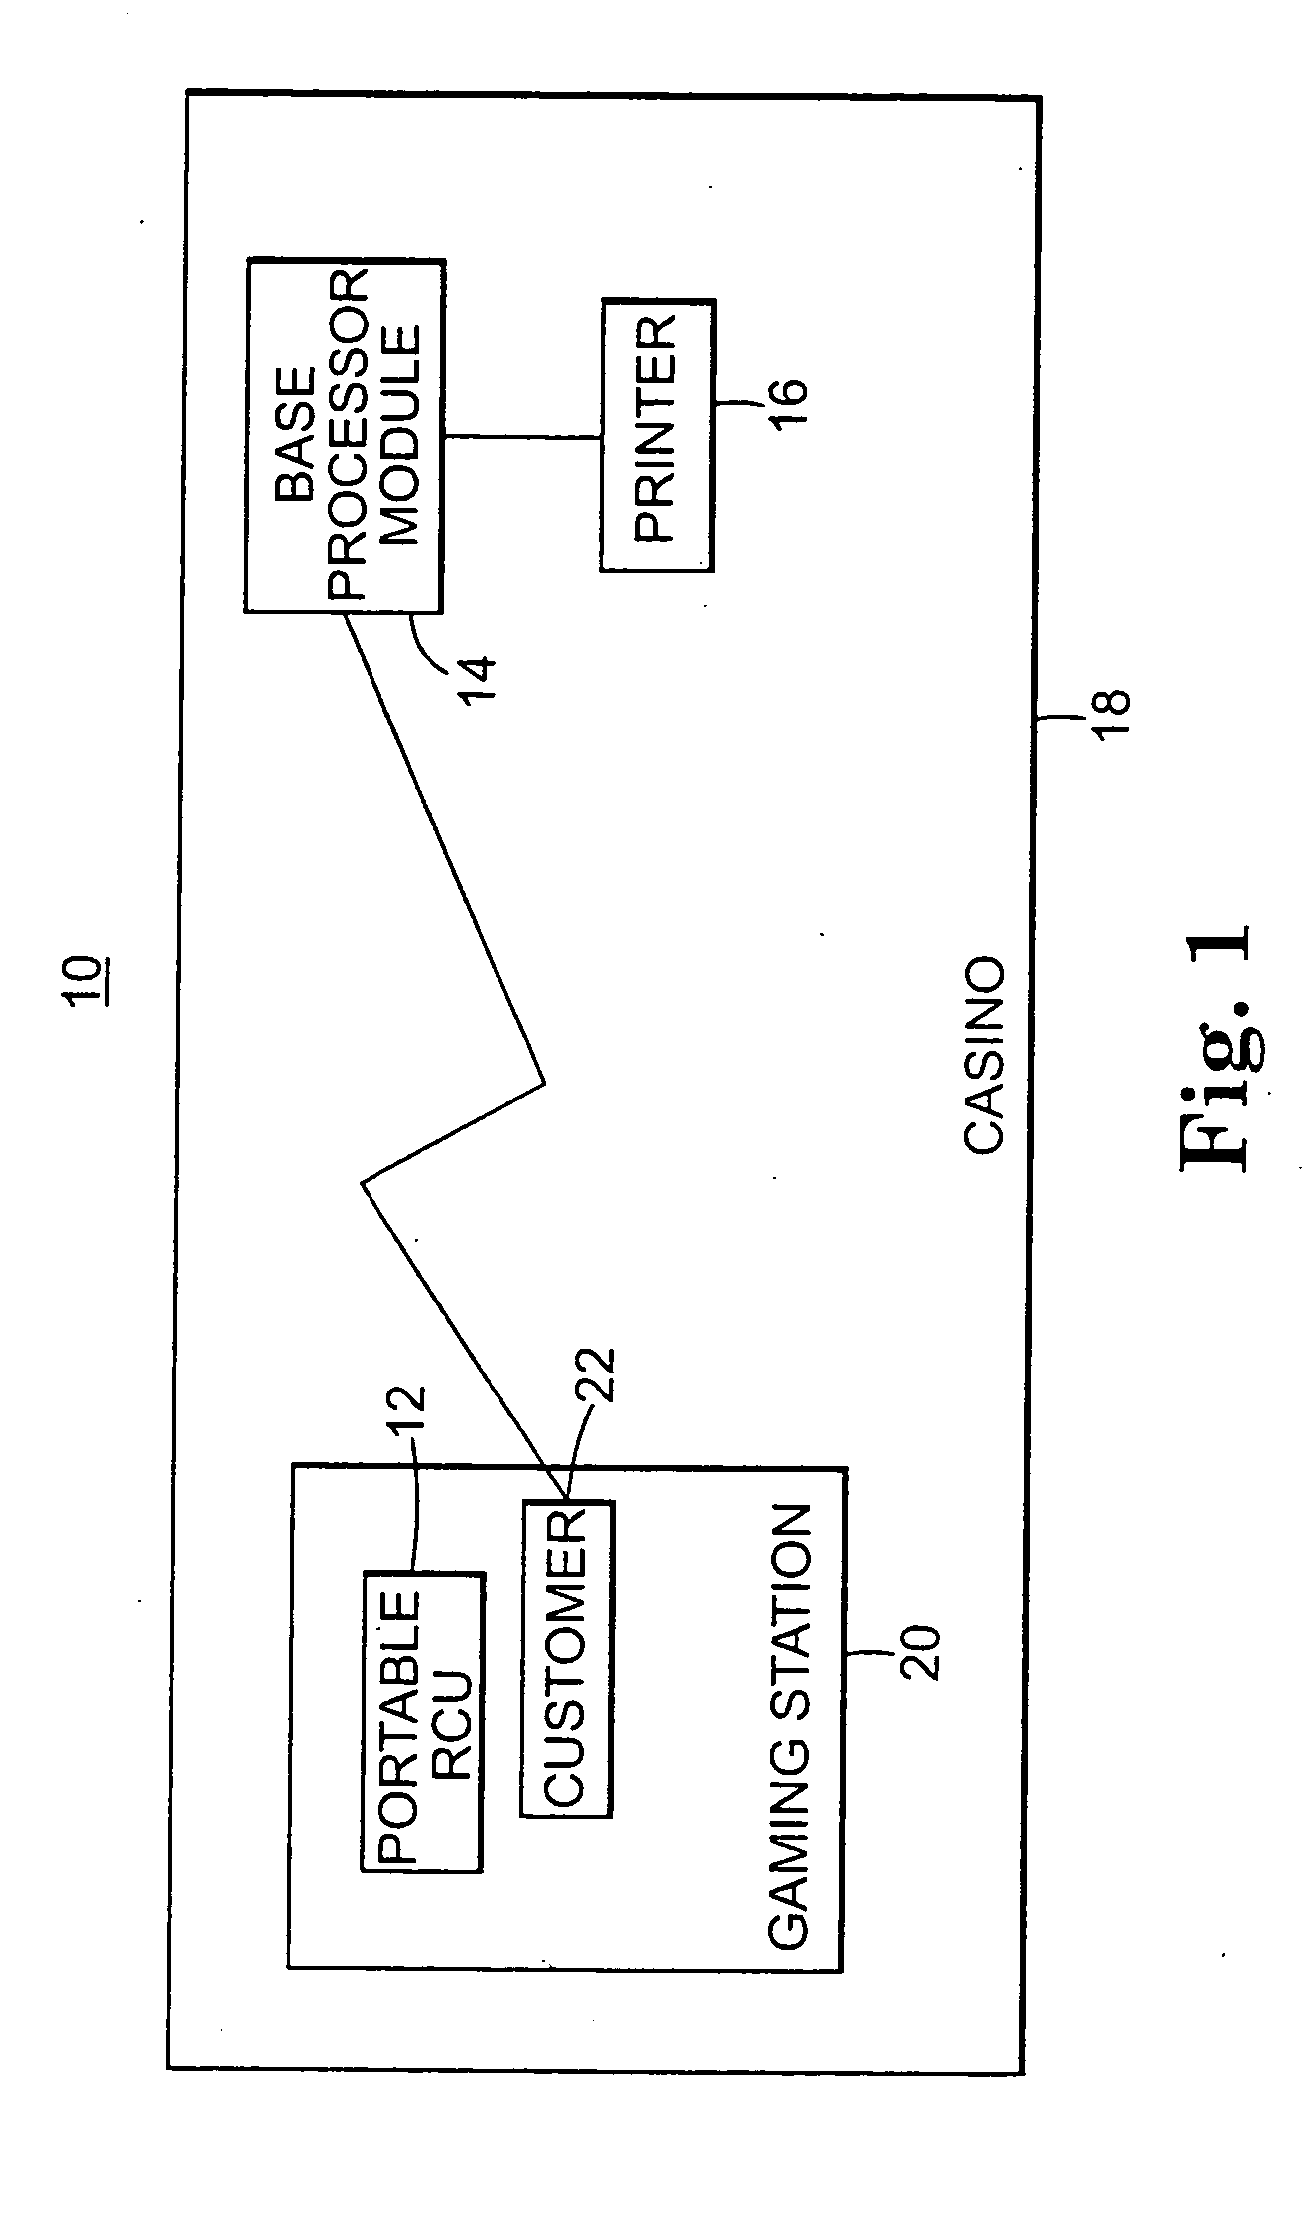 System and method for performing a financial transaction in an entertainment center